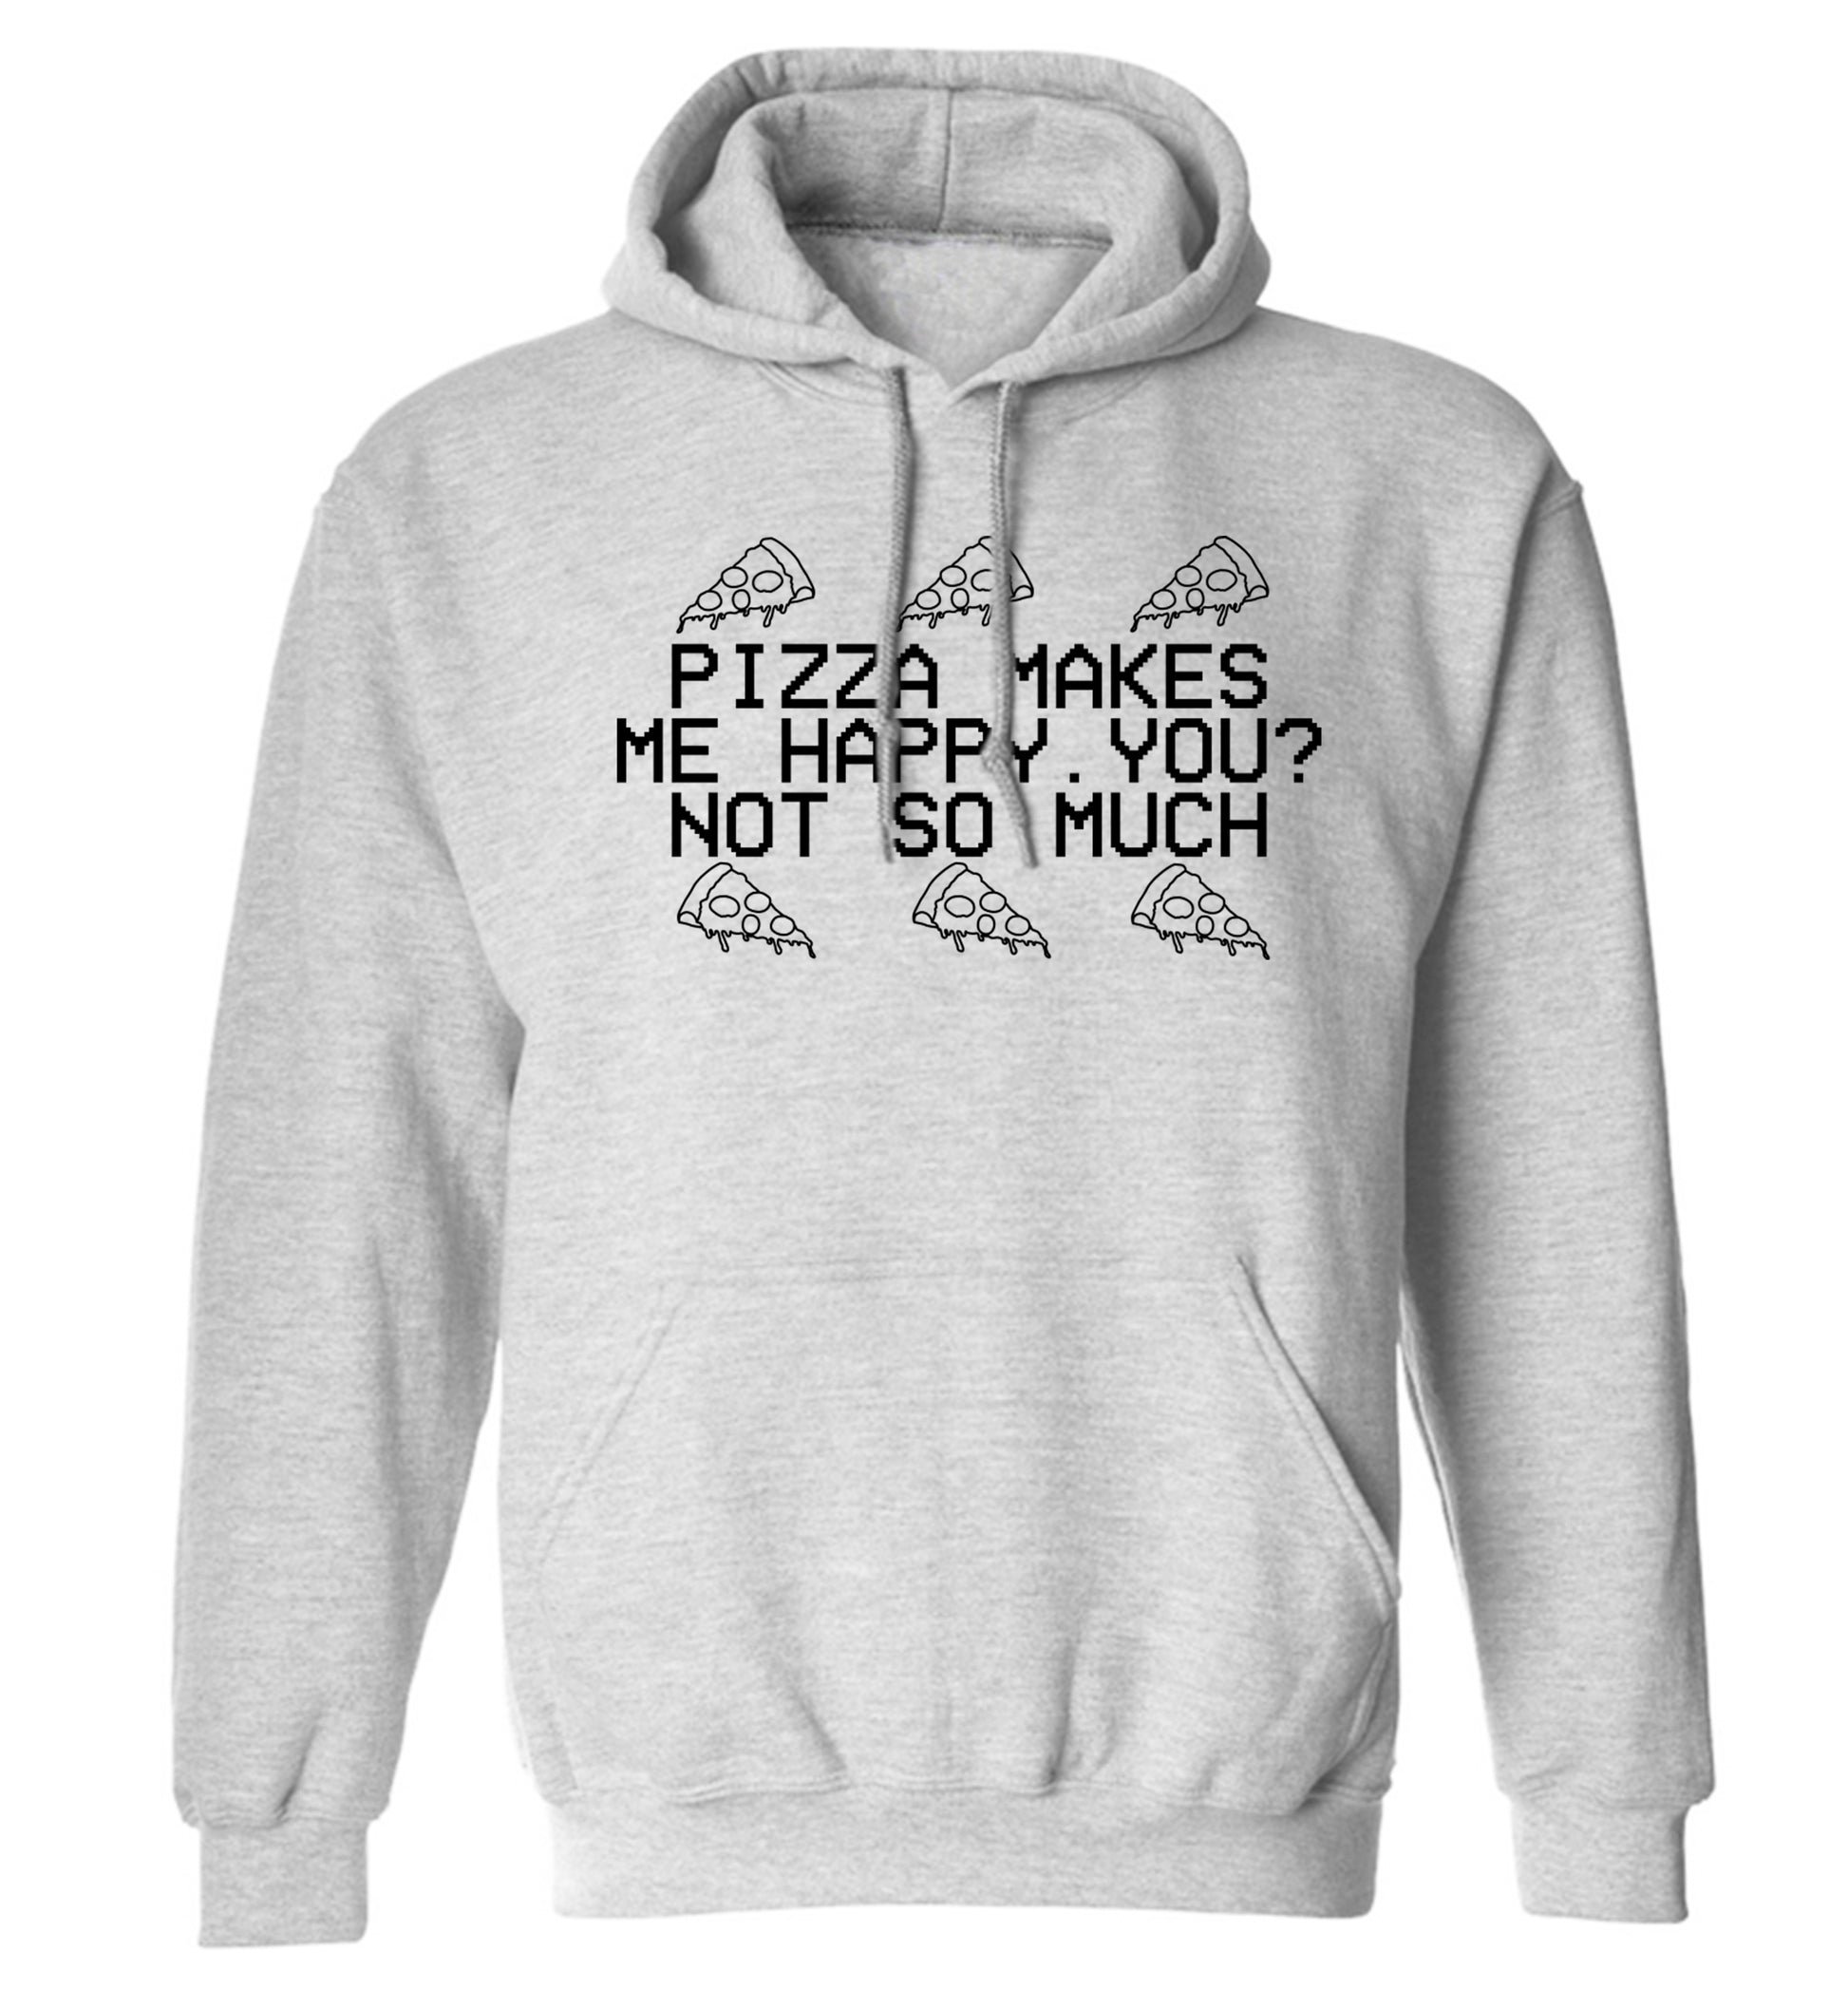 Pizza makes me happy, You? Not so much adults unisex grey hoodie 2XL